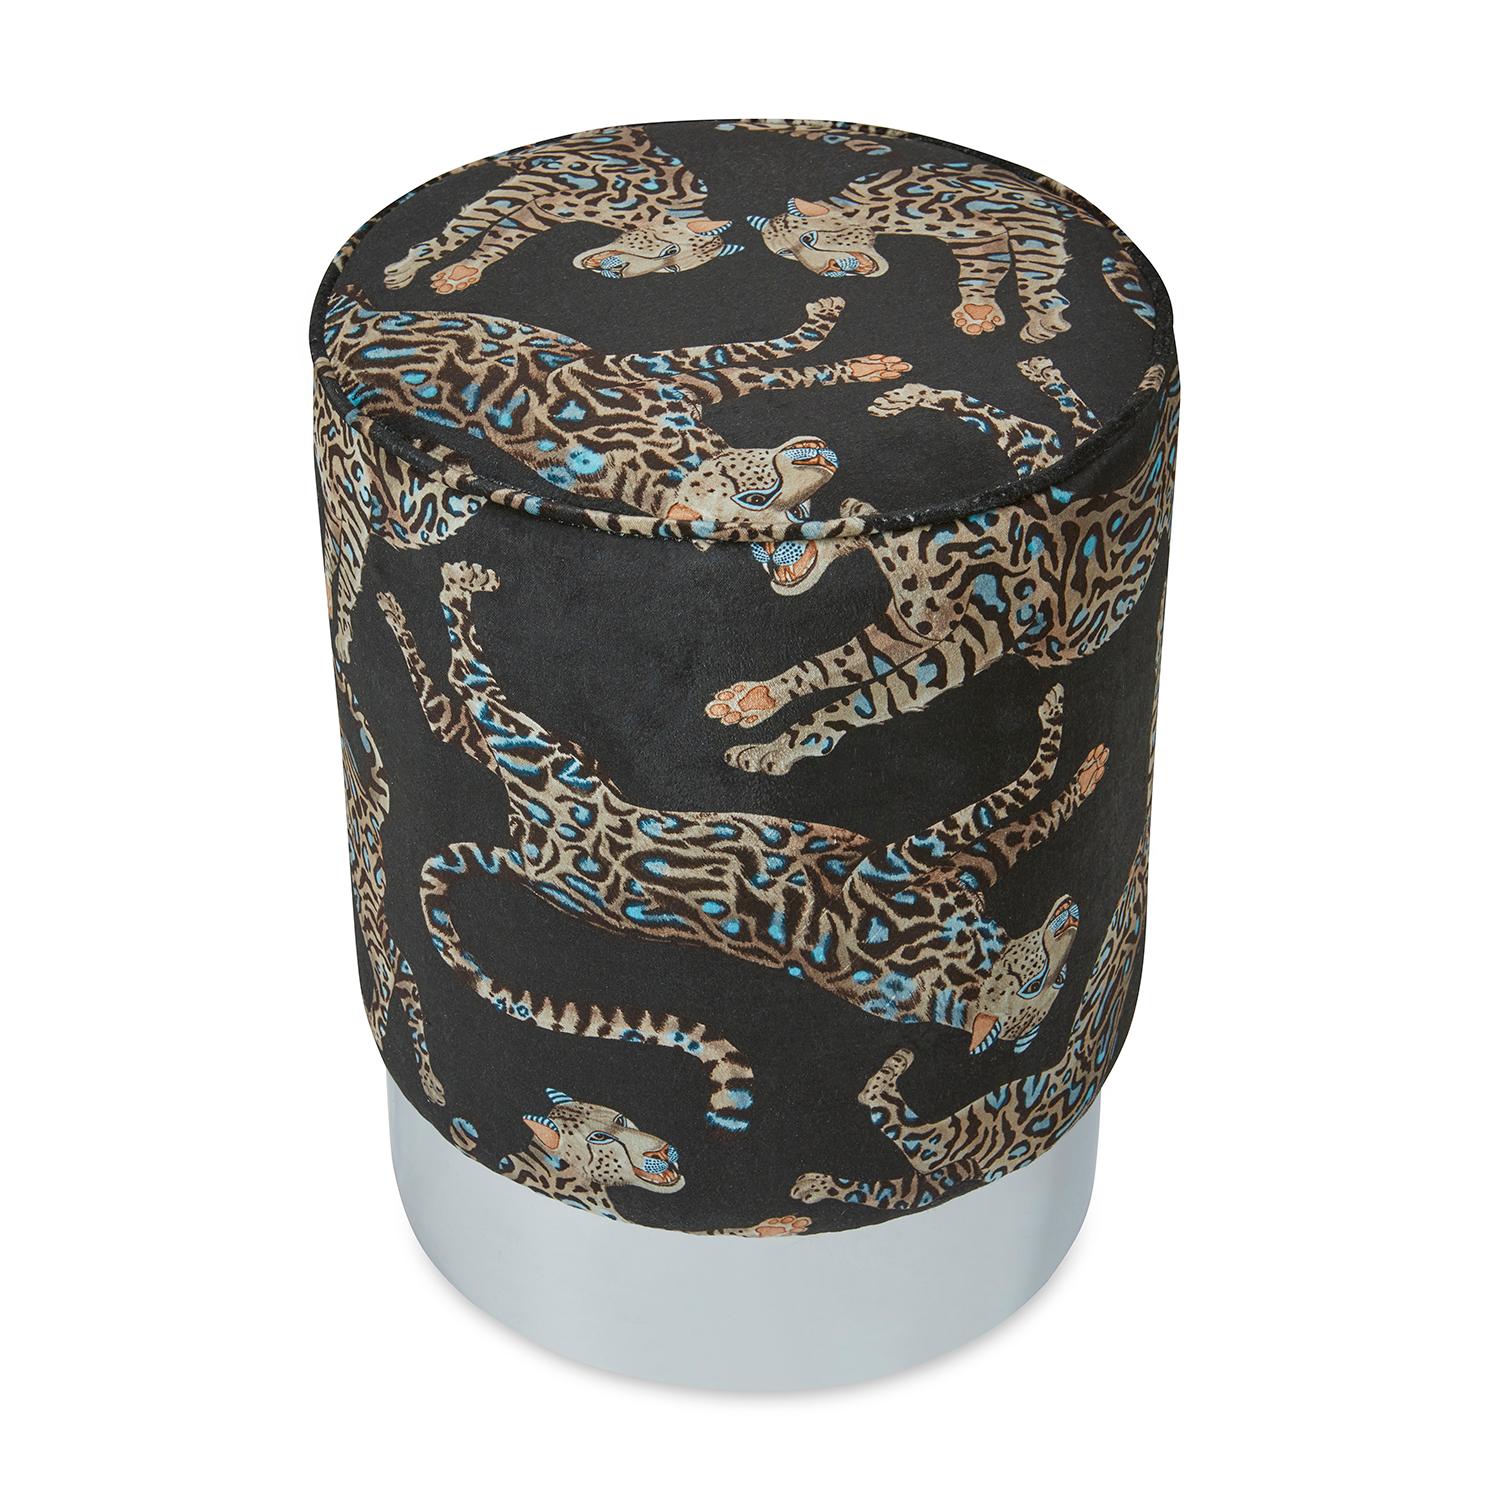 A luxurious Cheetah Kings Gold Velvet Fabric covered Pouff with a silver base.

Product Information
Dimensions: 15